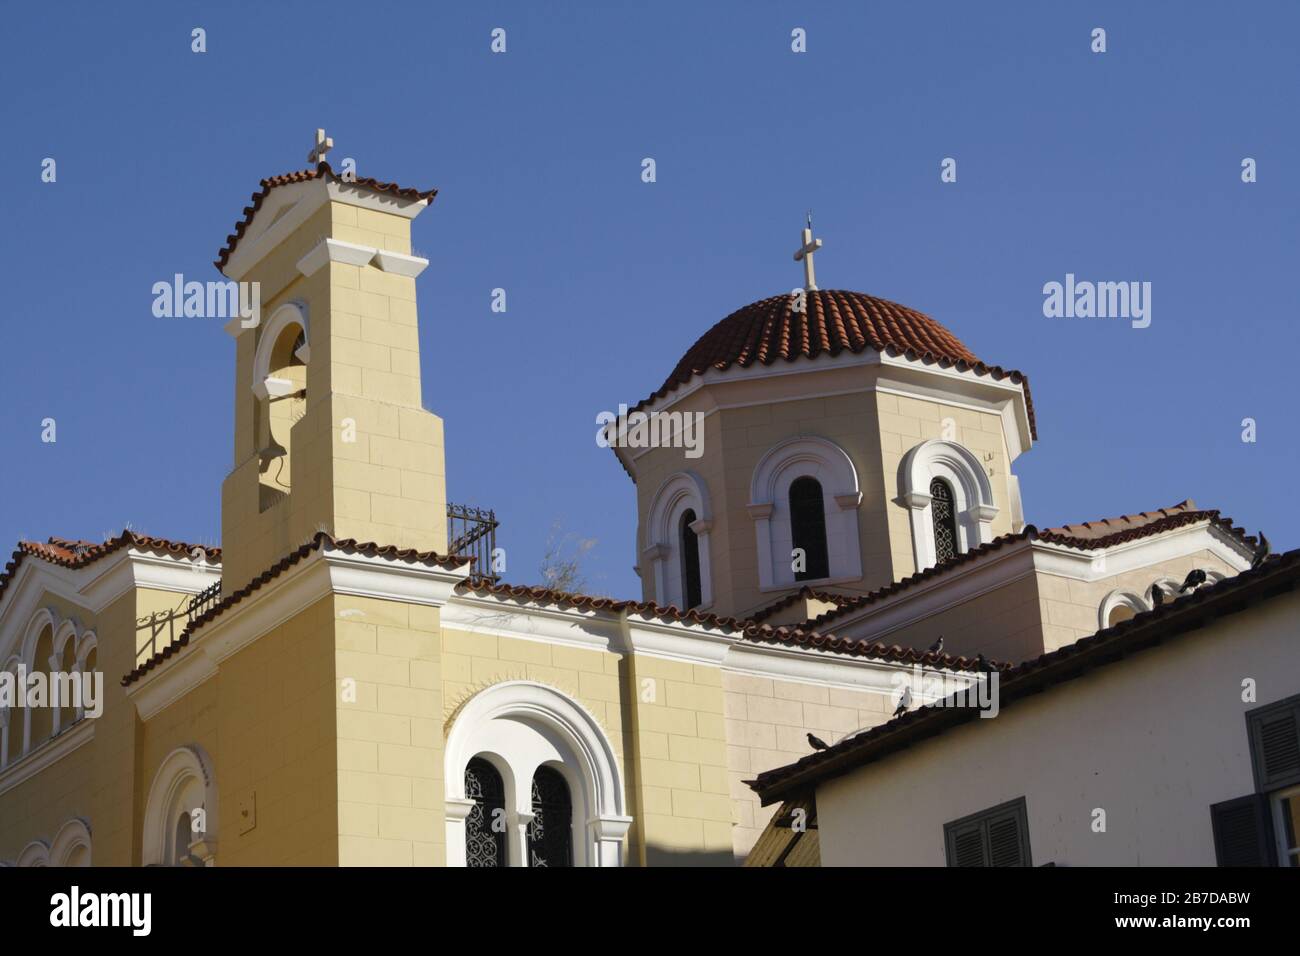 Greek Orthodox Church of Taxiarches, Panagia Grigorousa, Archangel Michael and Virgin Mary, Plaka, Athens, Greece Stock Photo